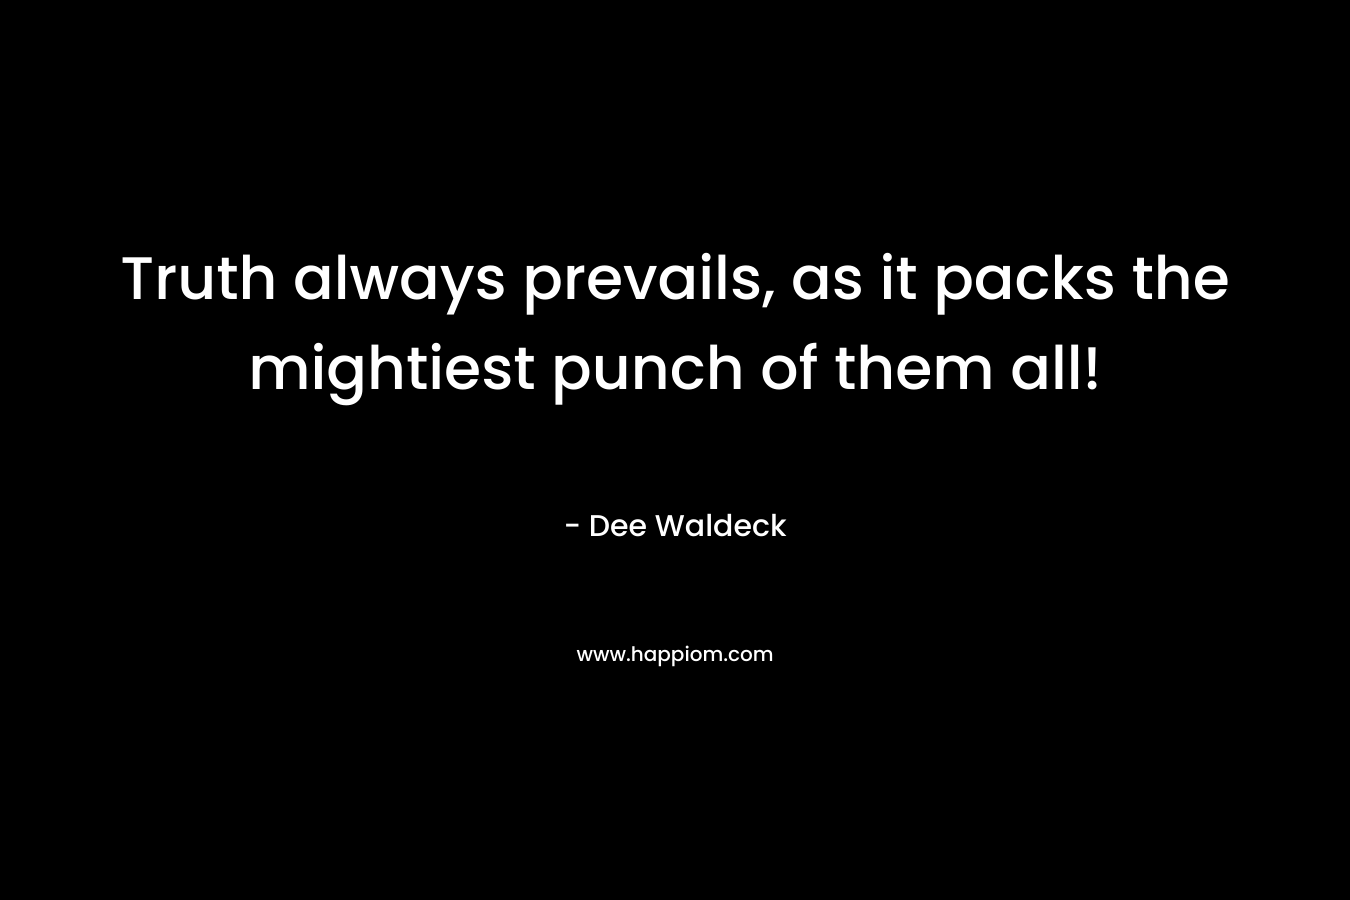 Truth always prevails, as it packs the mightiest punch of them all! – Dee Waldeck